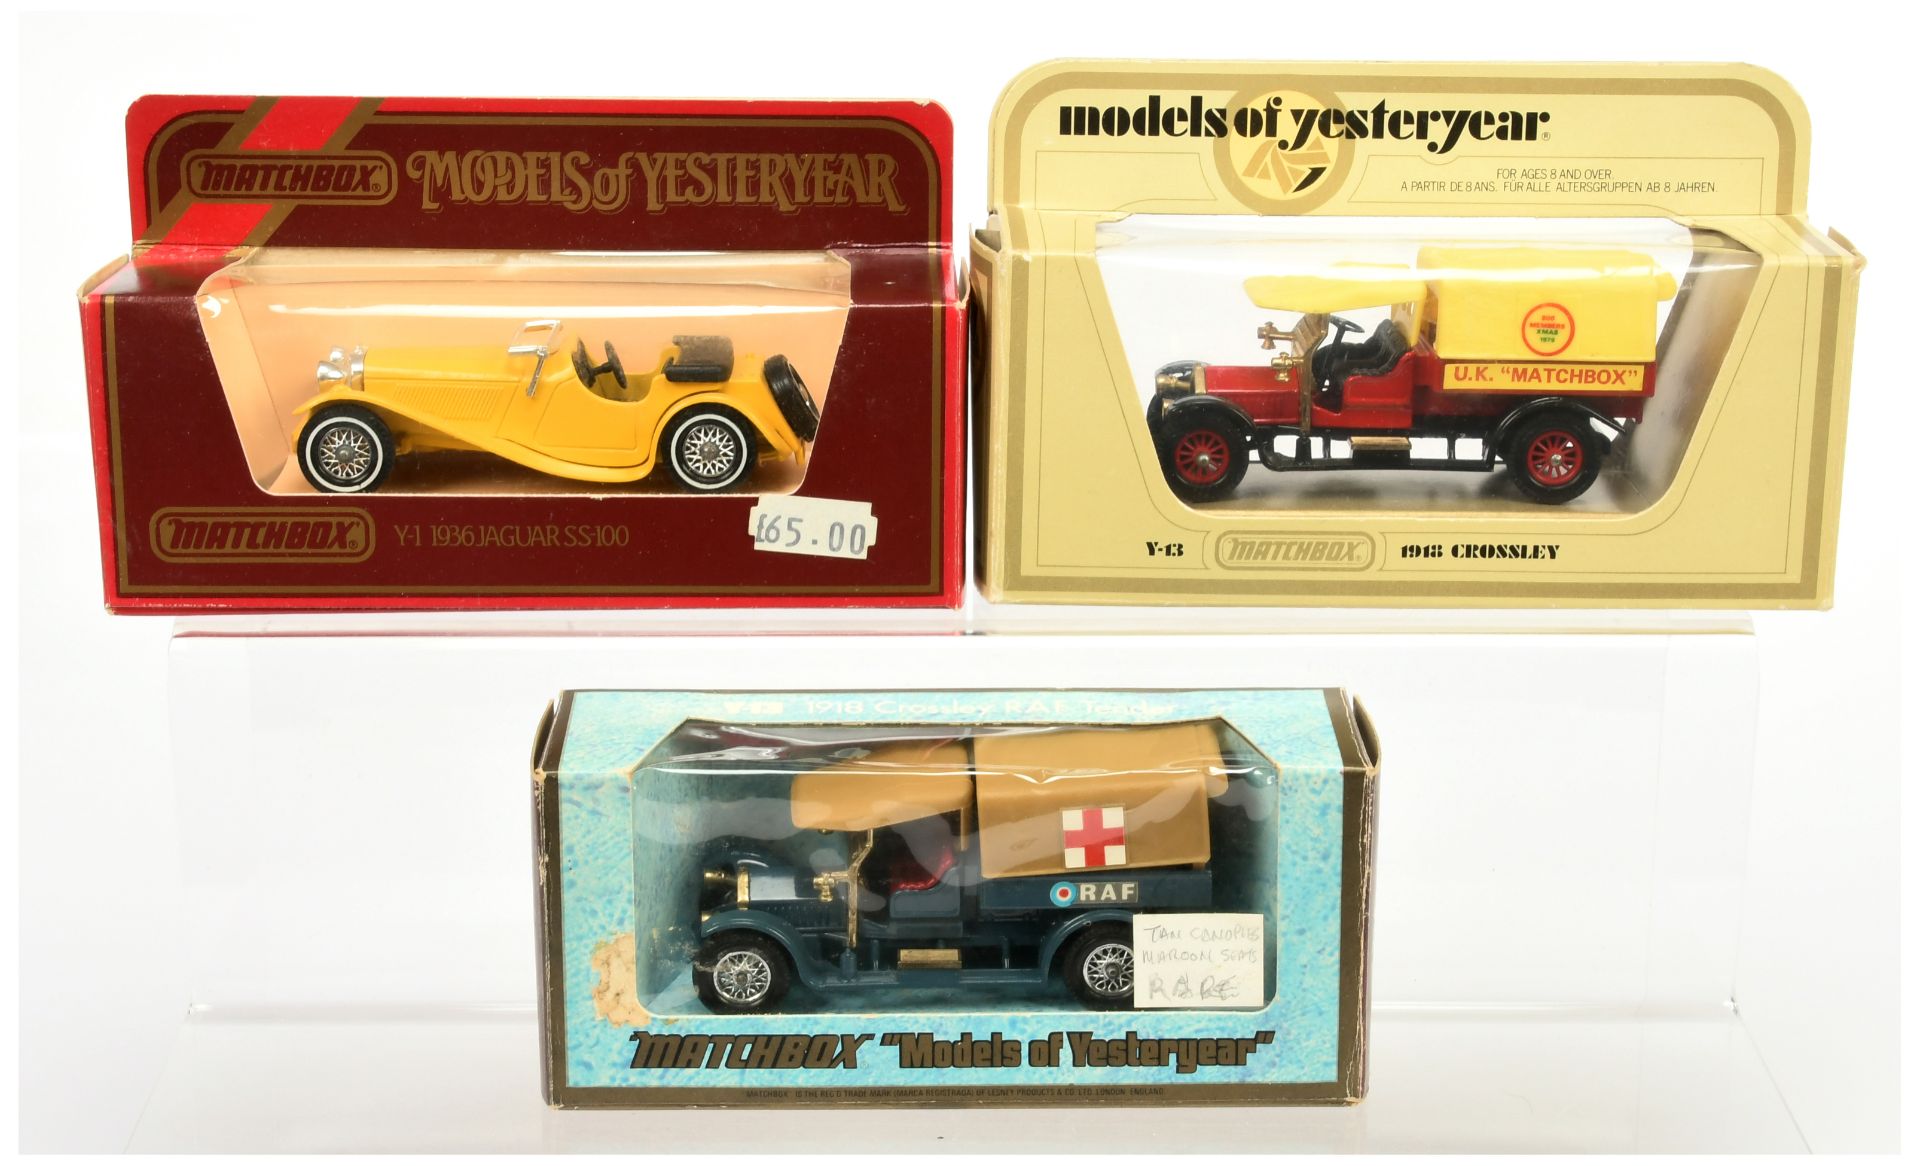 Matchbox Models of Yesteryear, a group of harder to find models (1) Y13 1918 Crossley - UK Matchb...